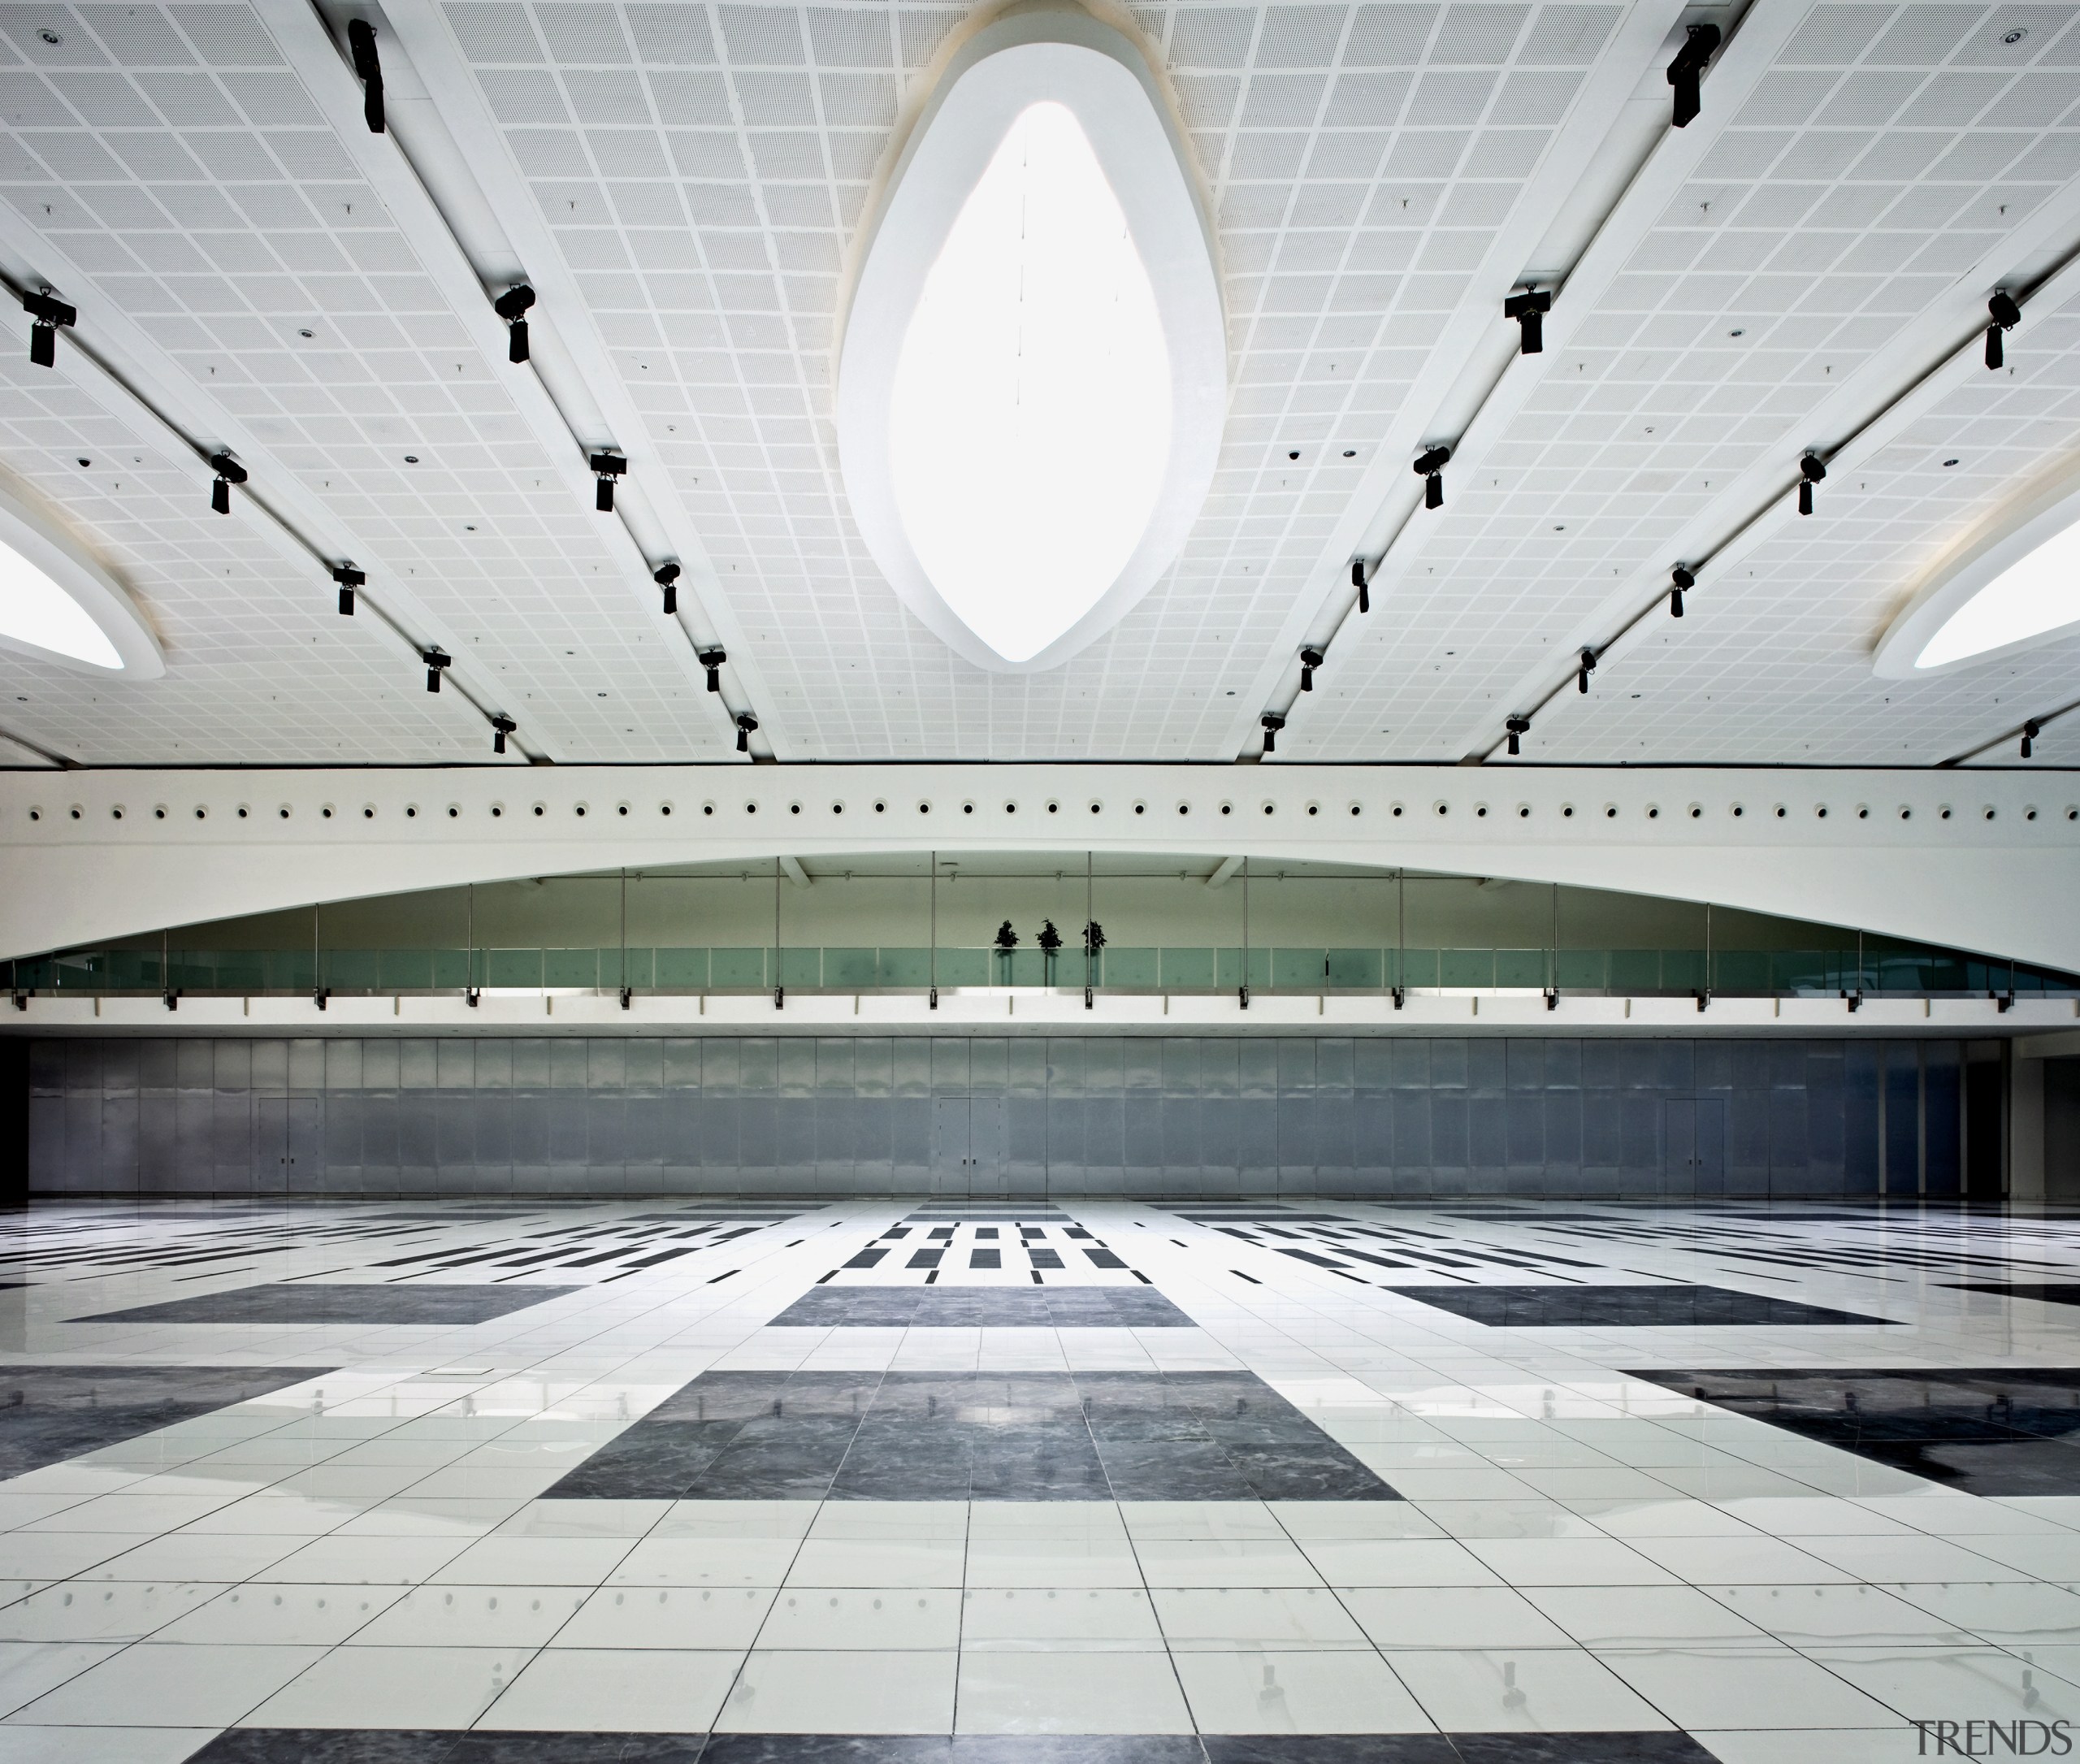 With its dramatic marble and stone floor and architecture, daylighting, line, structure, symmetry, gray, white